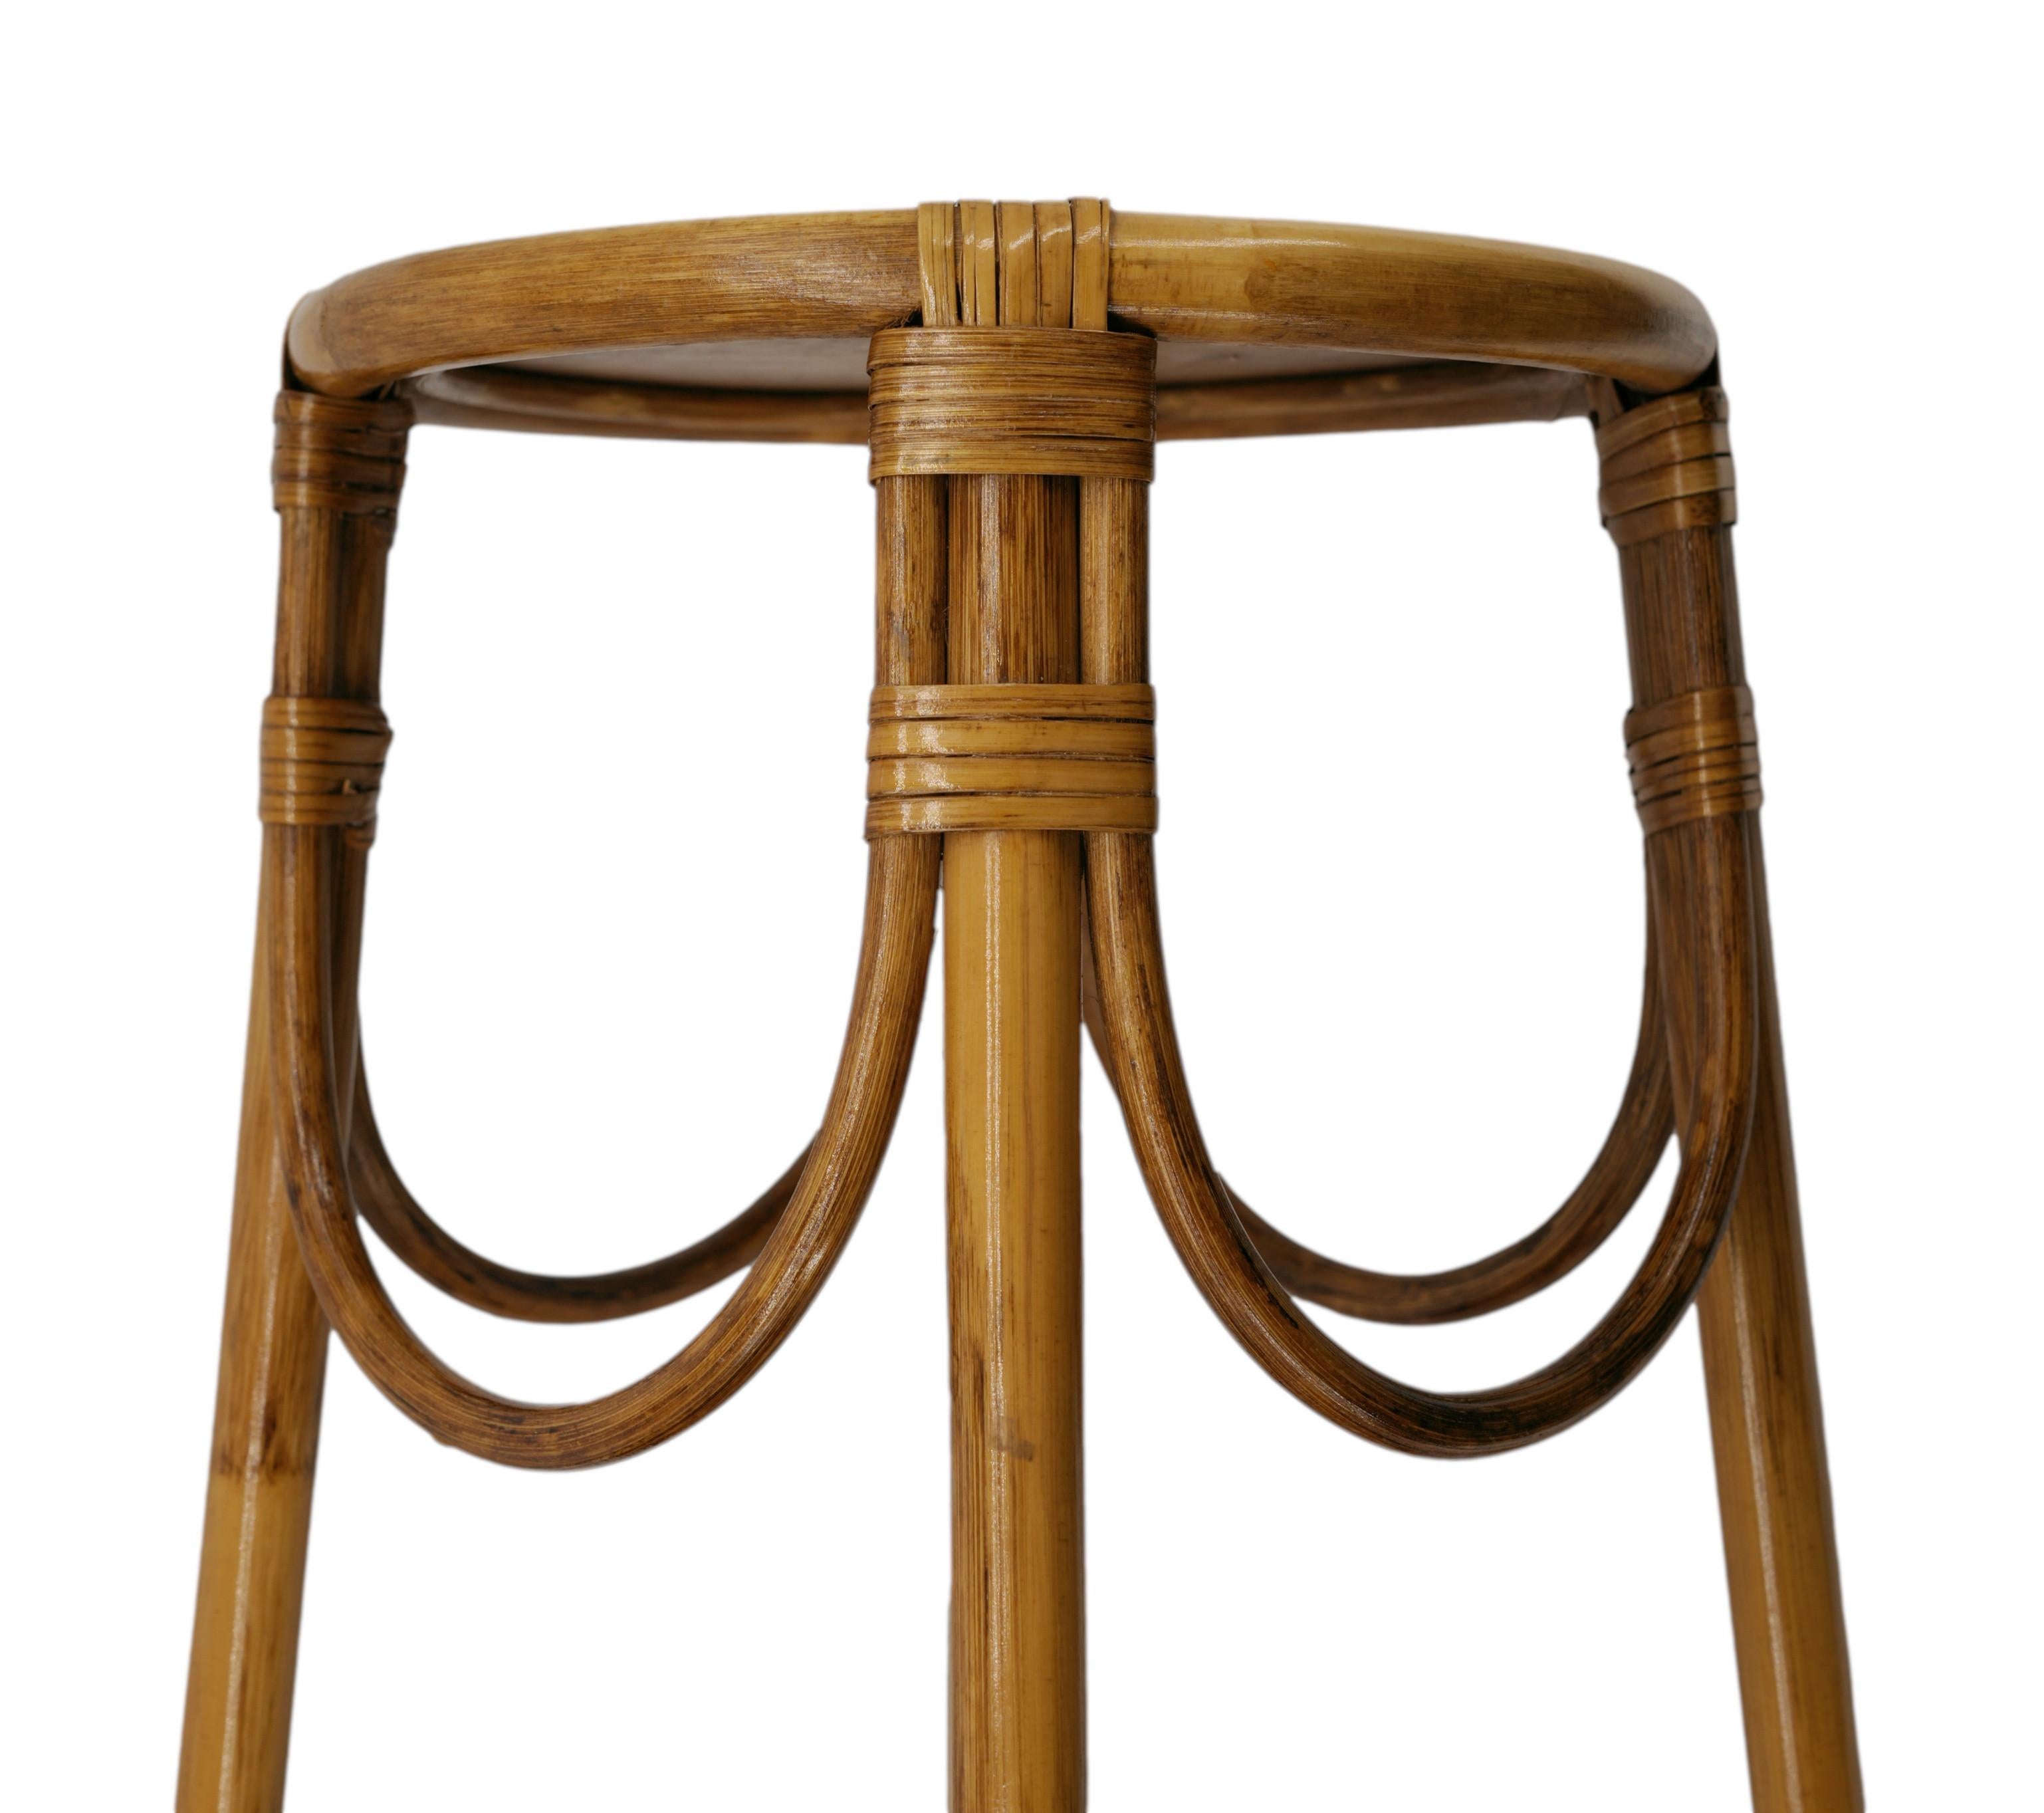 French Rattan & Bamboo Harness Table, 1950s For Sale 1